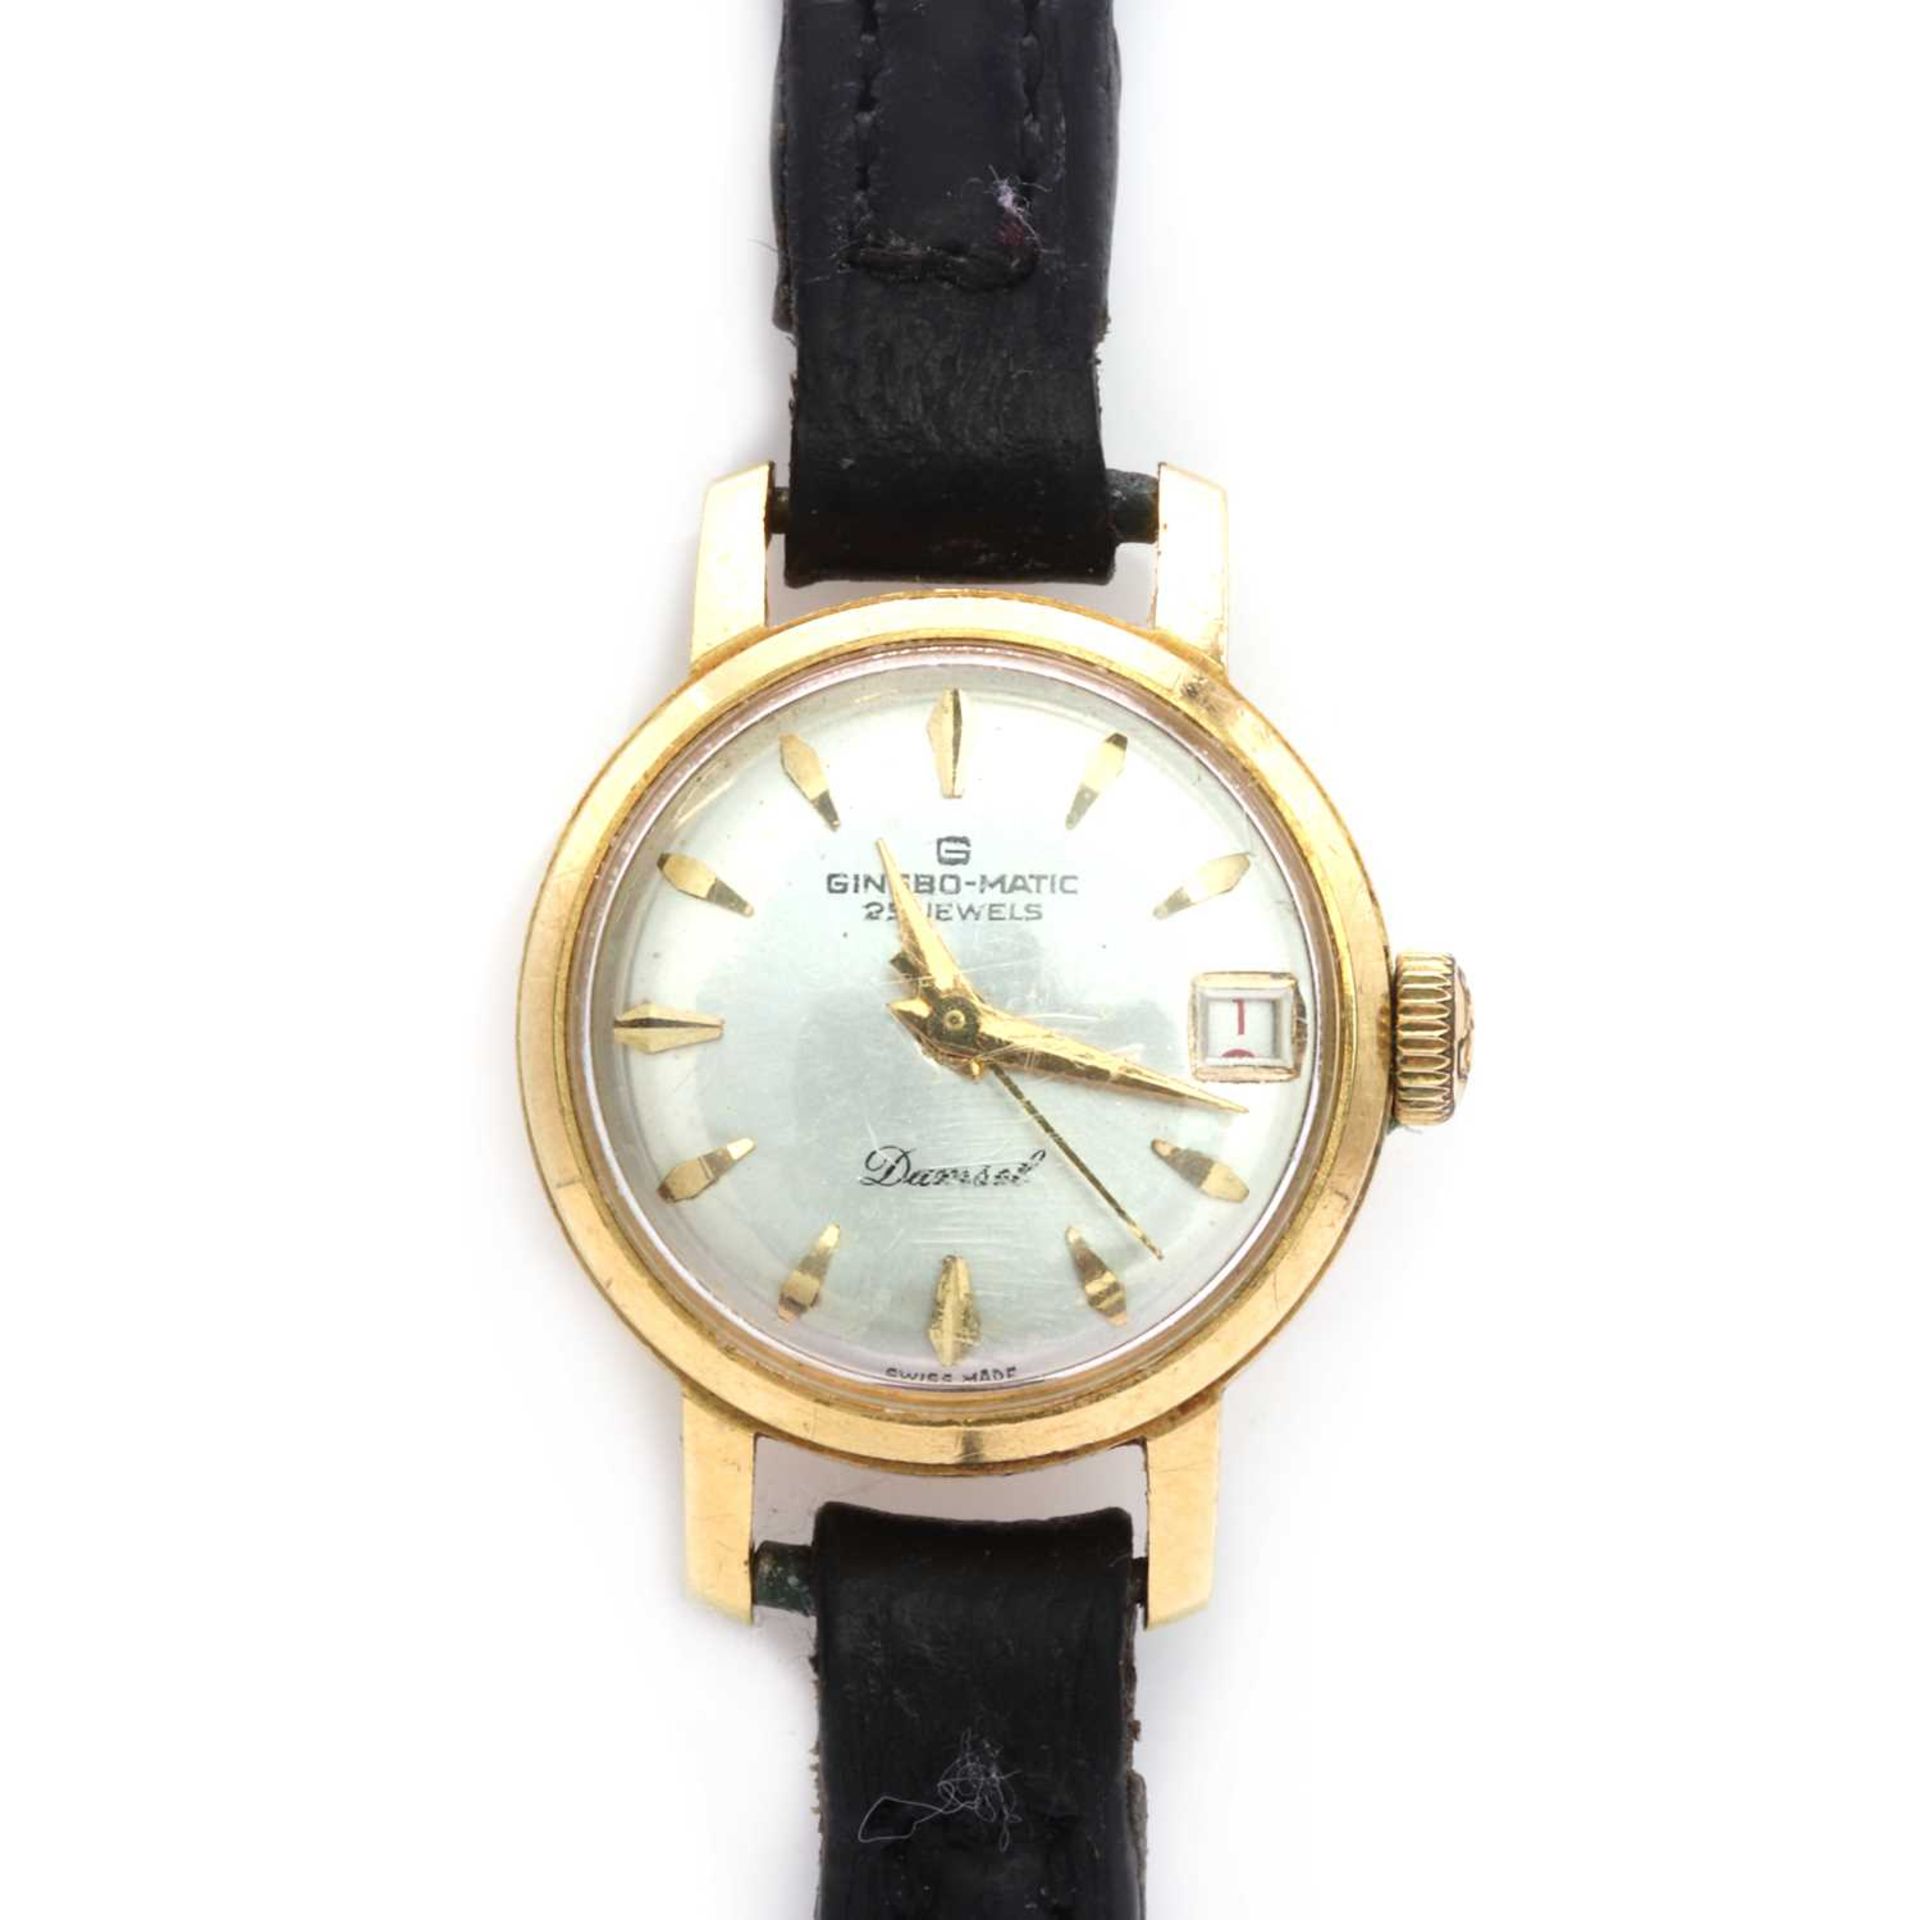 An 18ct gold Ladies' Ginsbo-Matic strap watch,